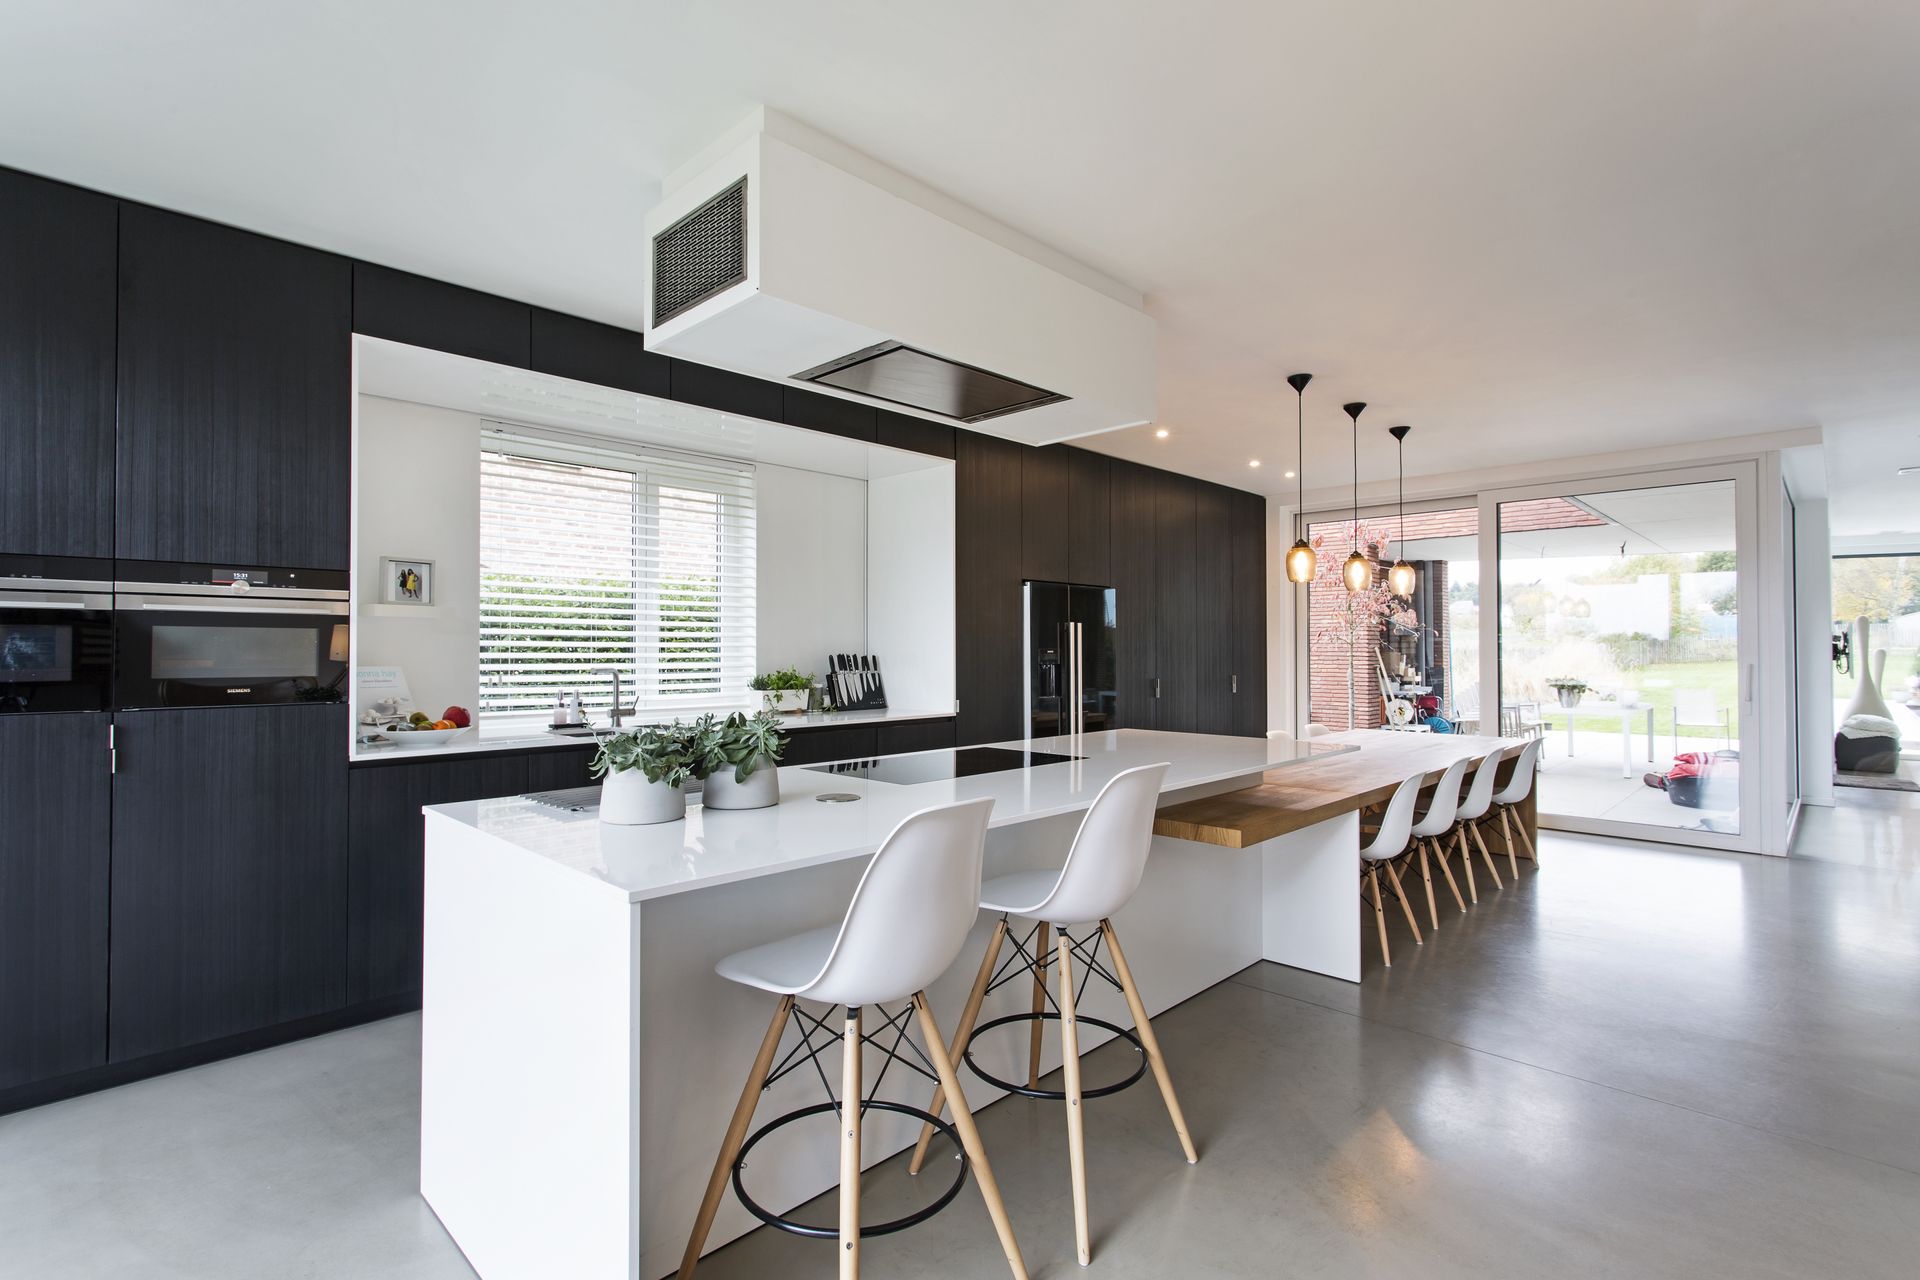 A kitchen with black cabinets and white counter tops and chairs.